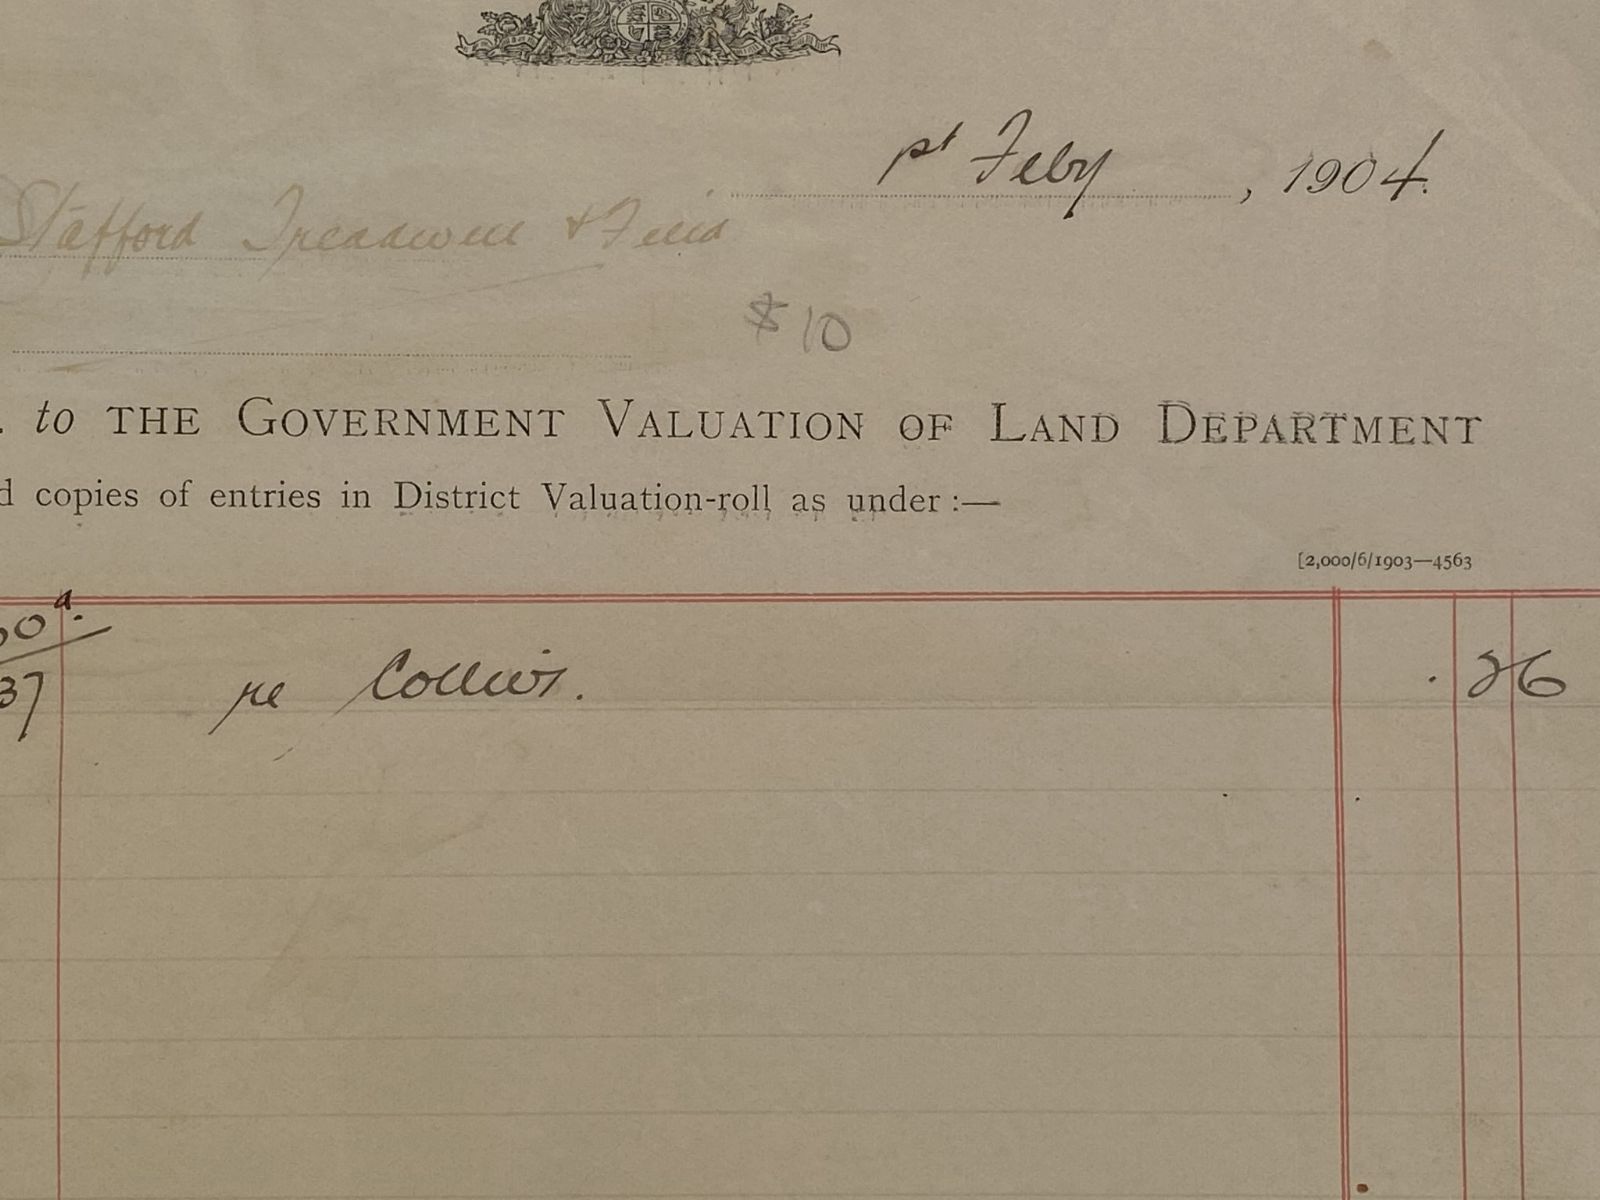 ANTIQUE INVOICE / RECEIPT: Government Valuation of Land Department 1904